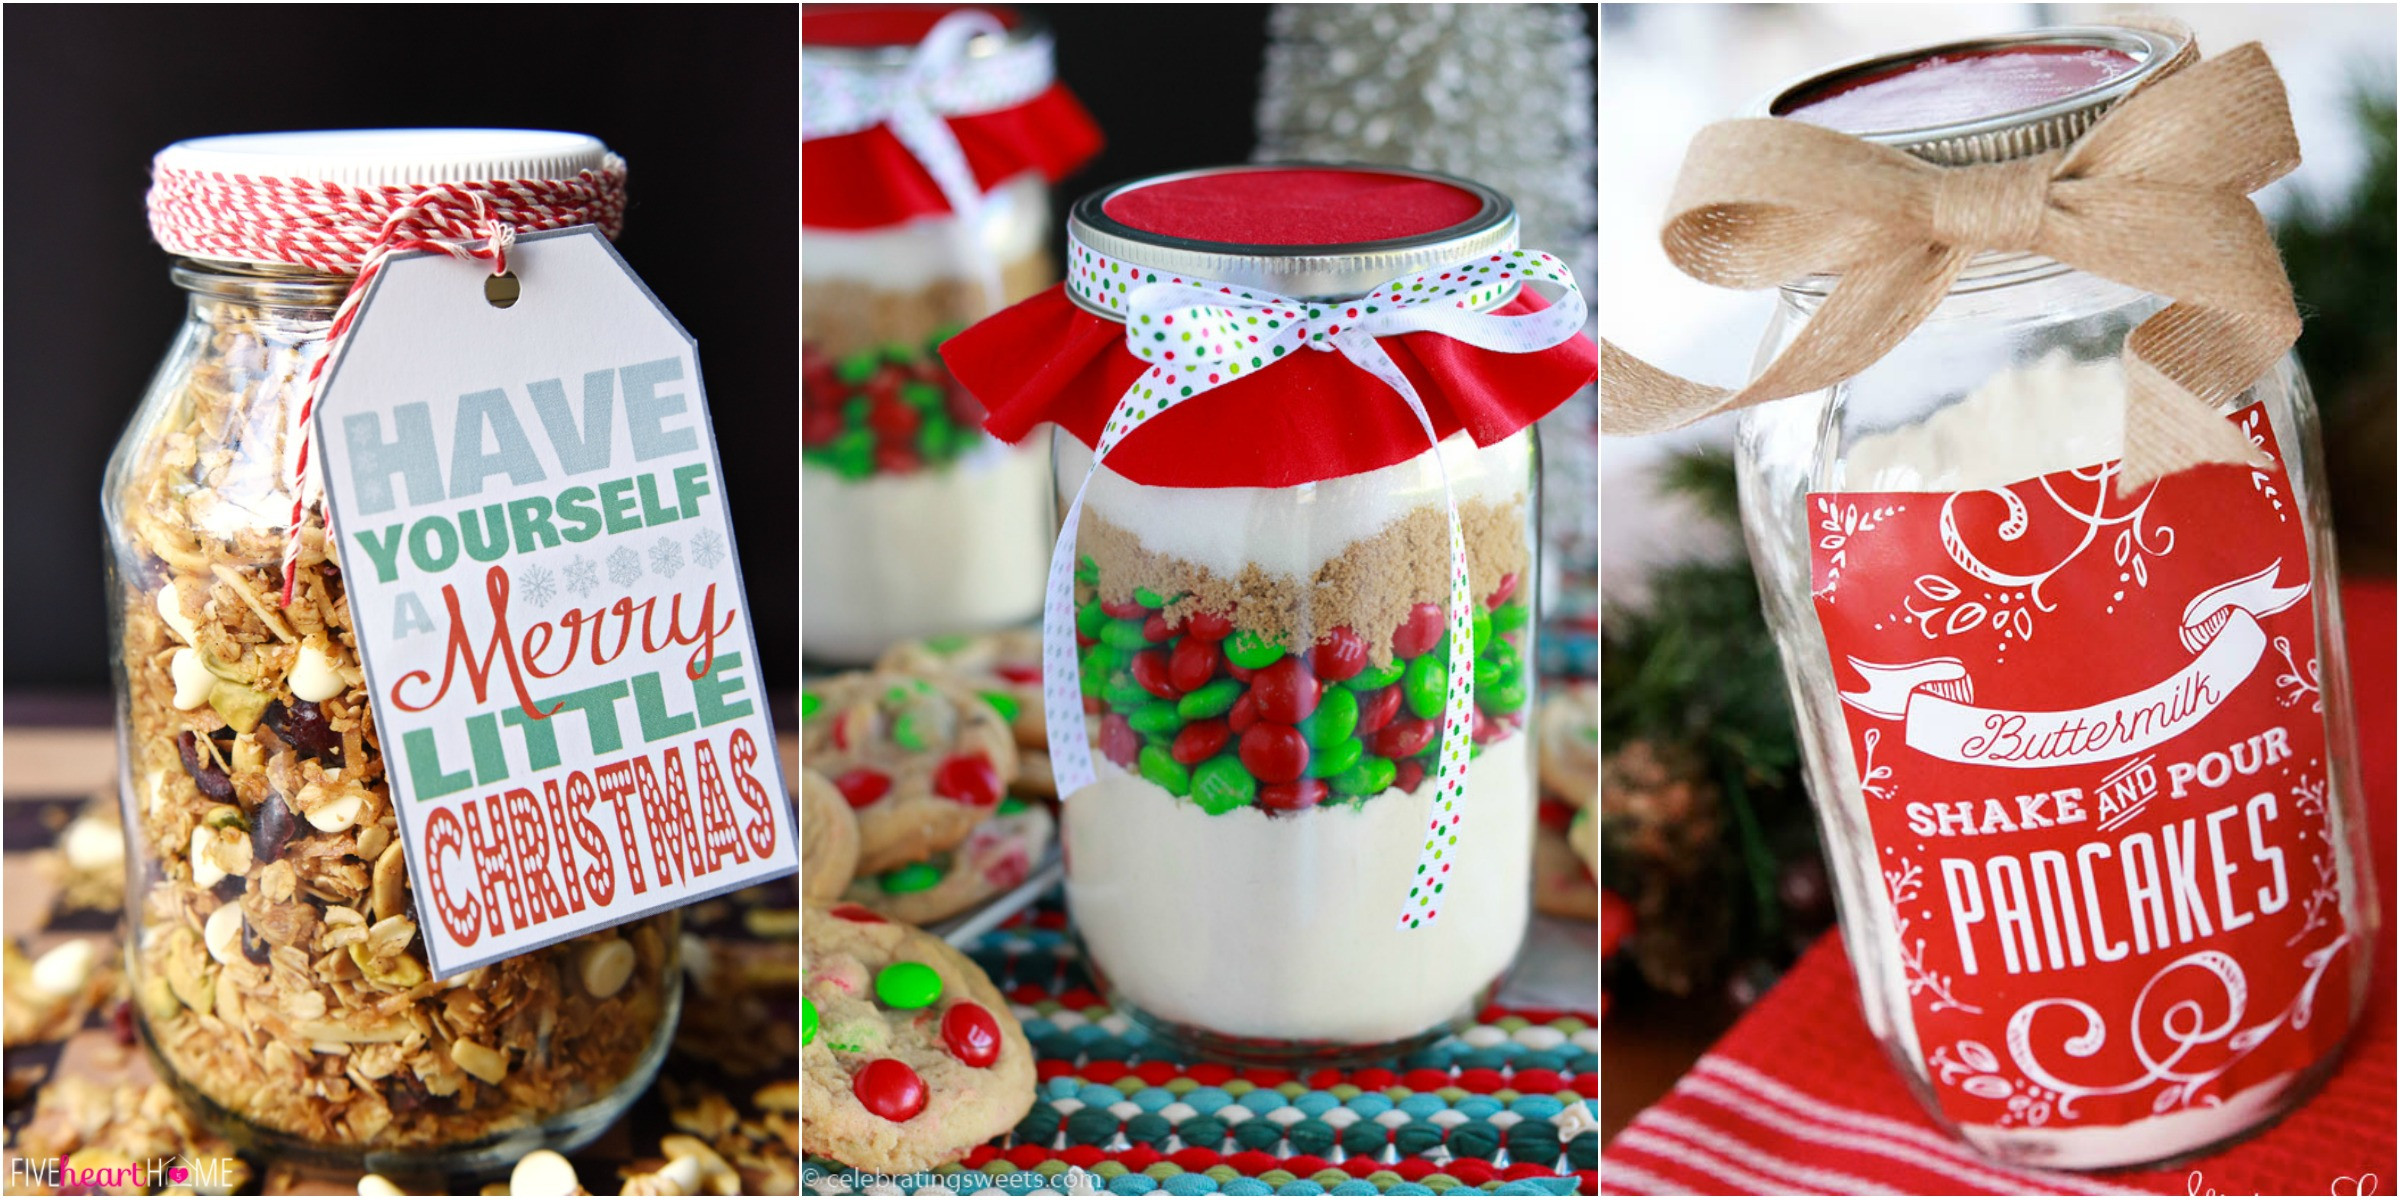 Food Gifts For Christmas
 34 Mason Jar Christmas Food Gifts – Recipes for Gifts in a